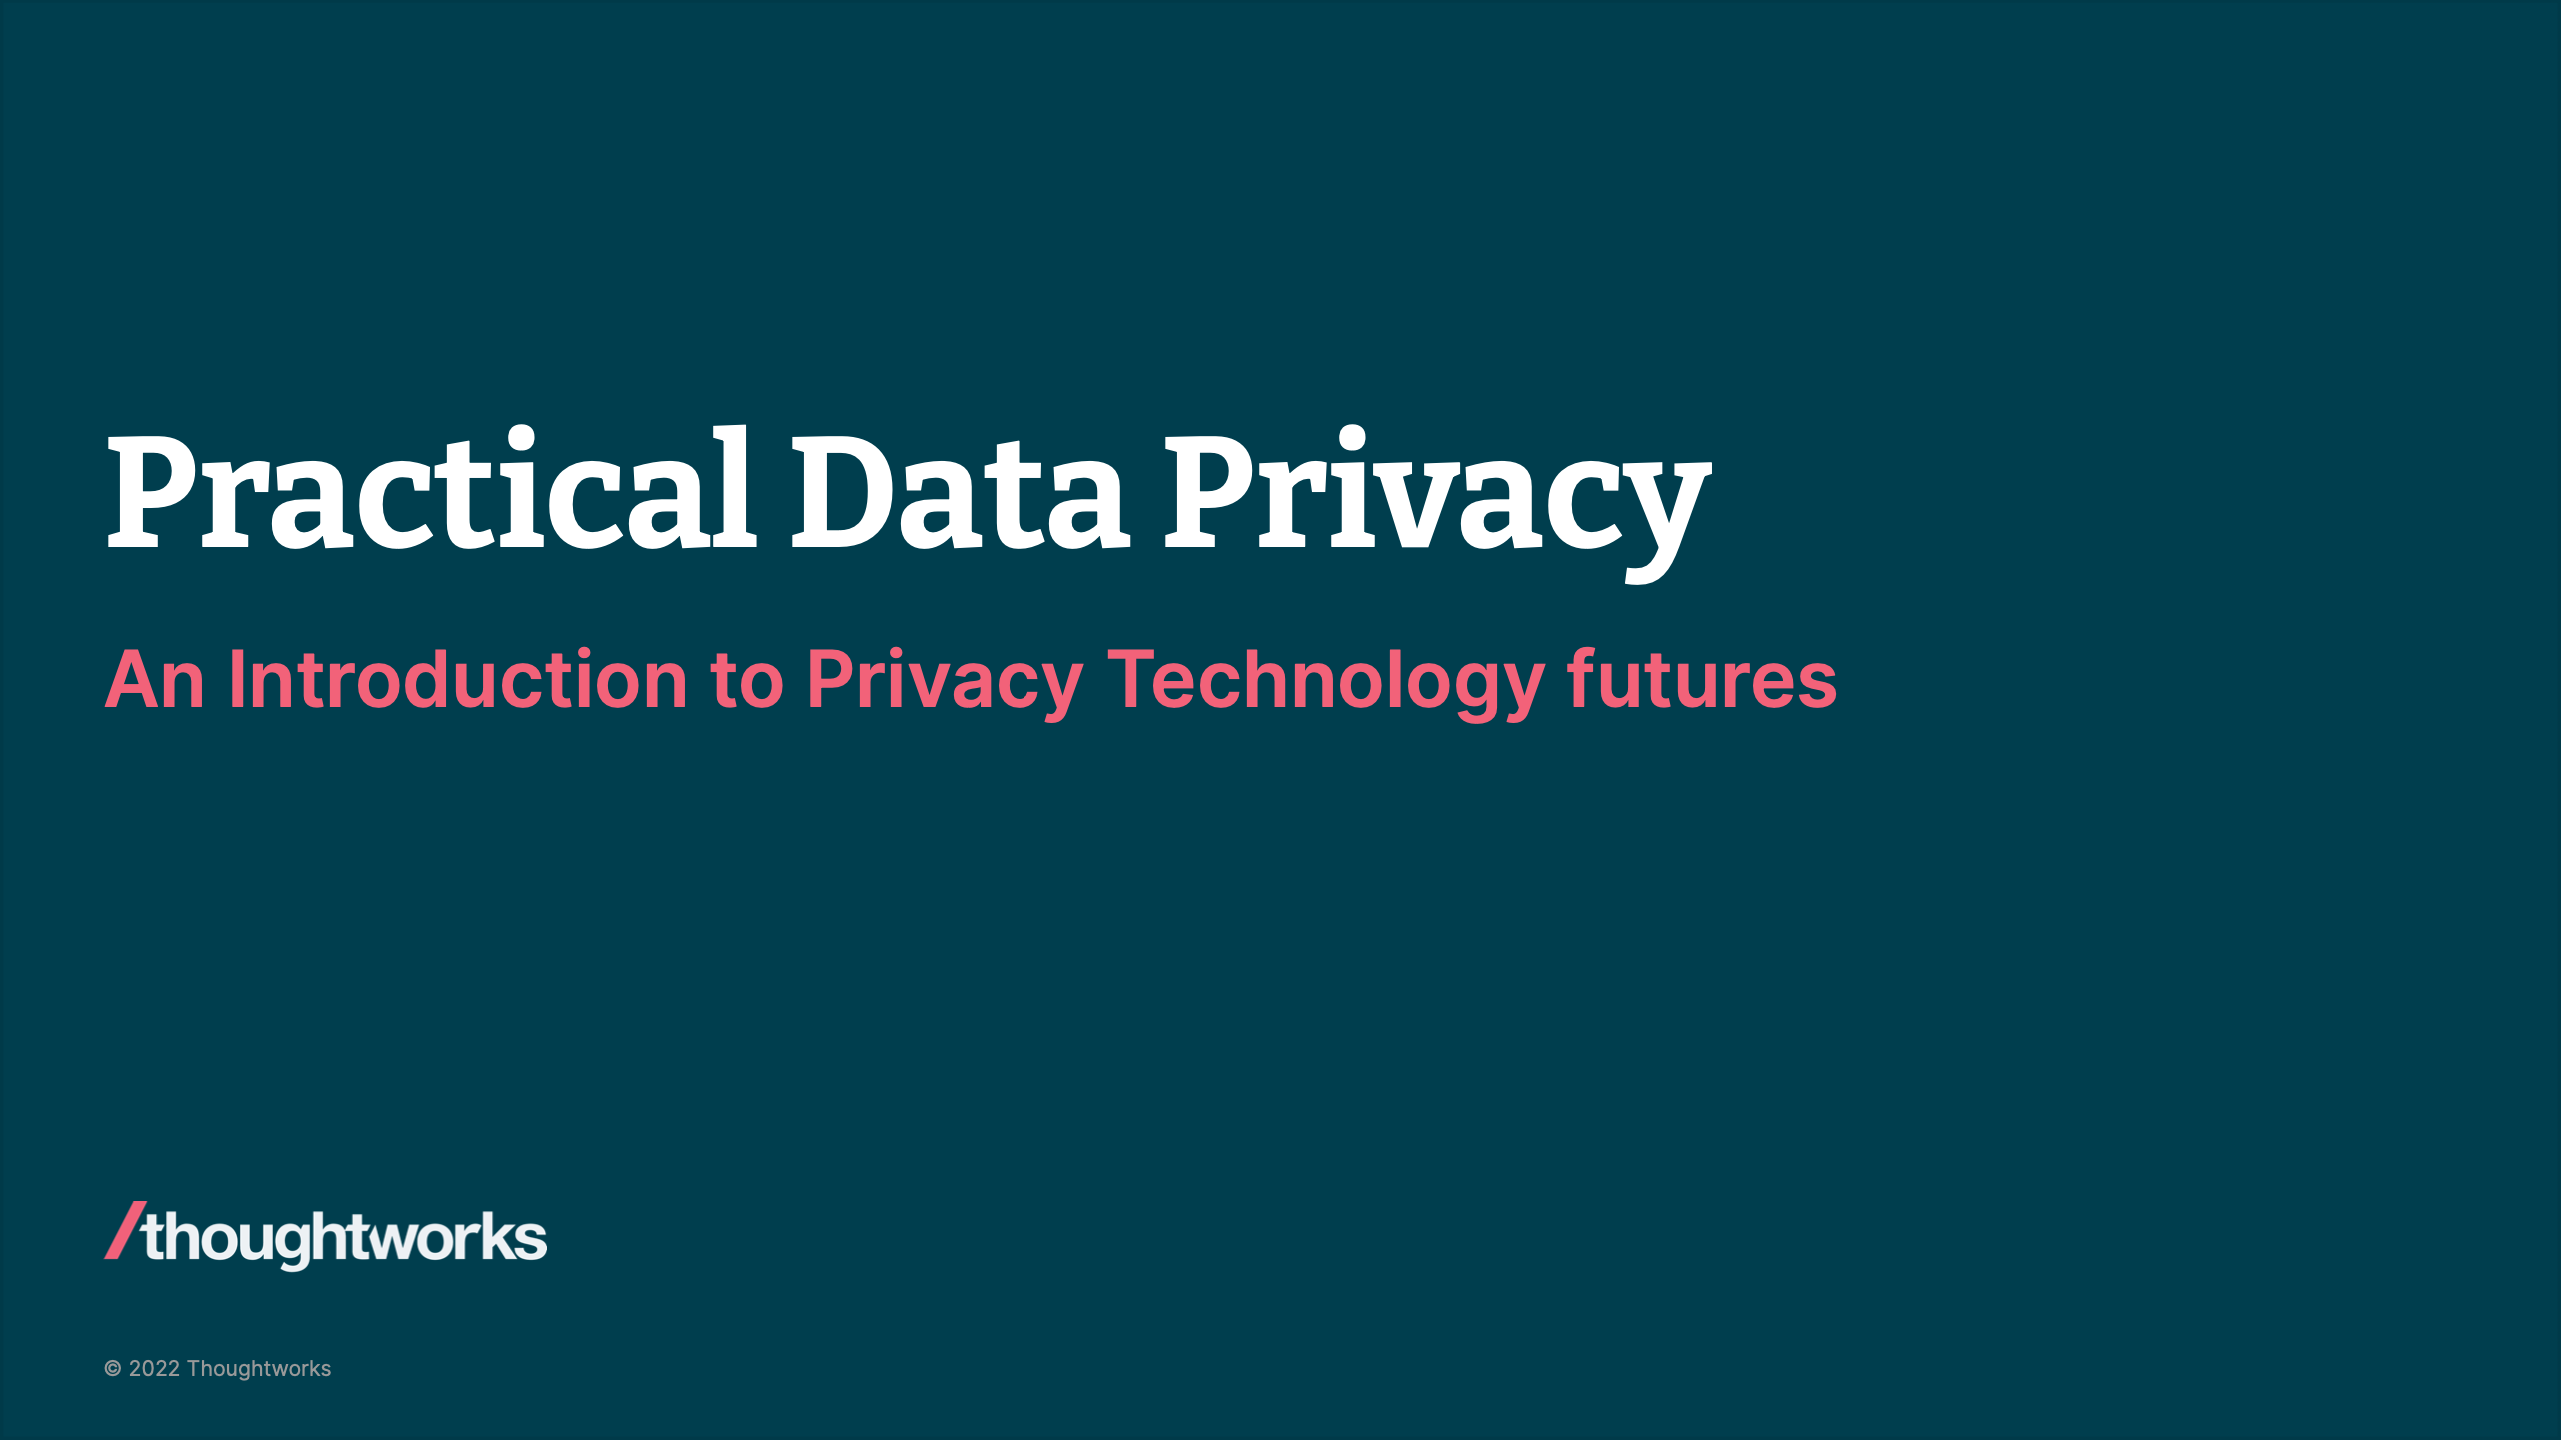 «Practical Data Privacy. An Introduction to Privacy Technology futures» by Katharine Jarmul